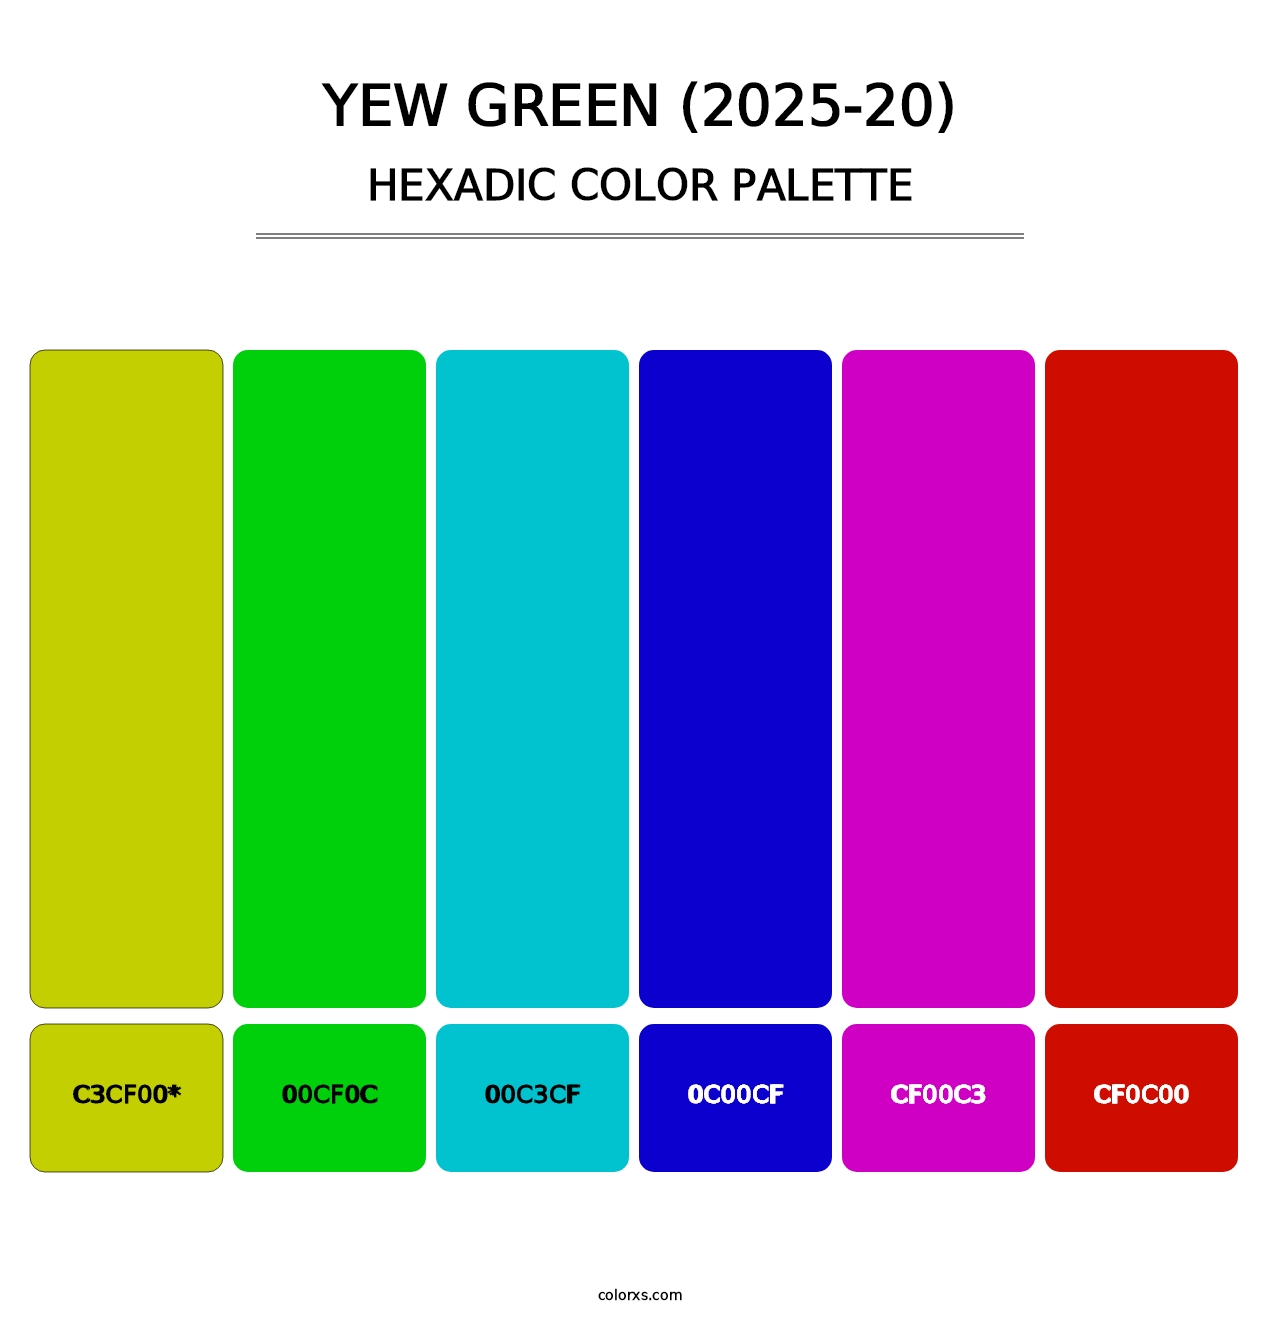 Yew Green (2025-20) - Hexadic Color Palette